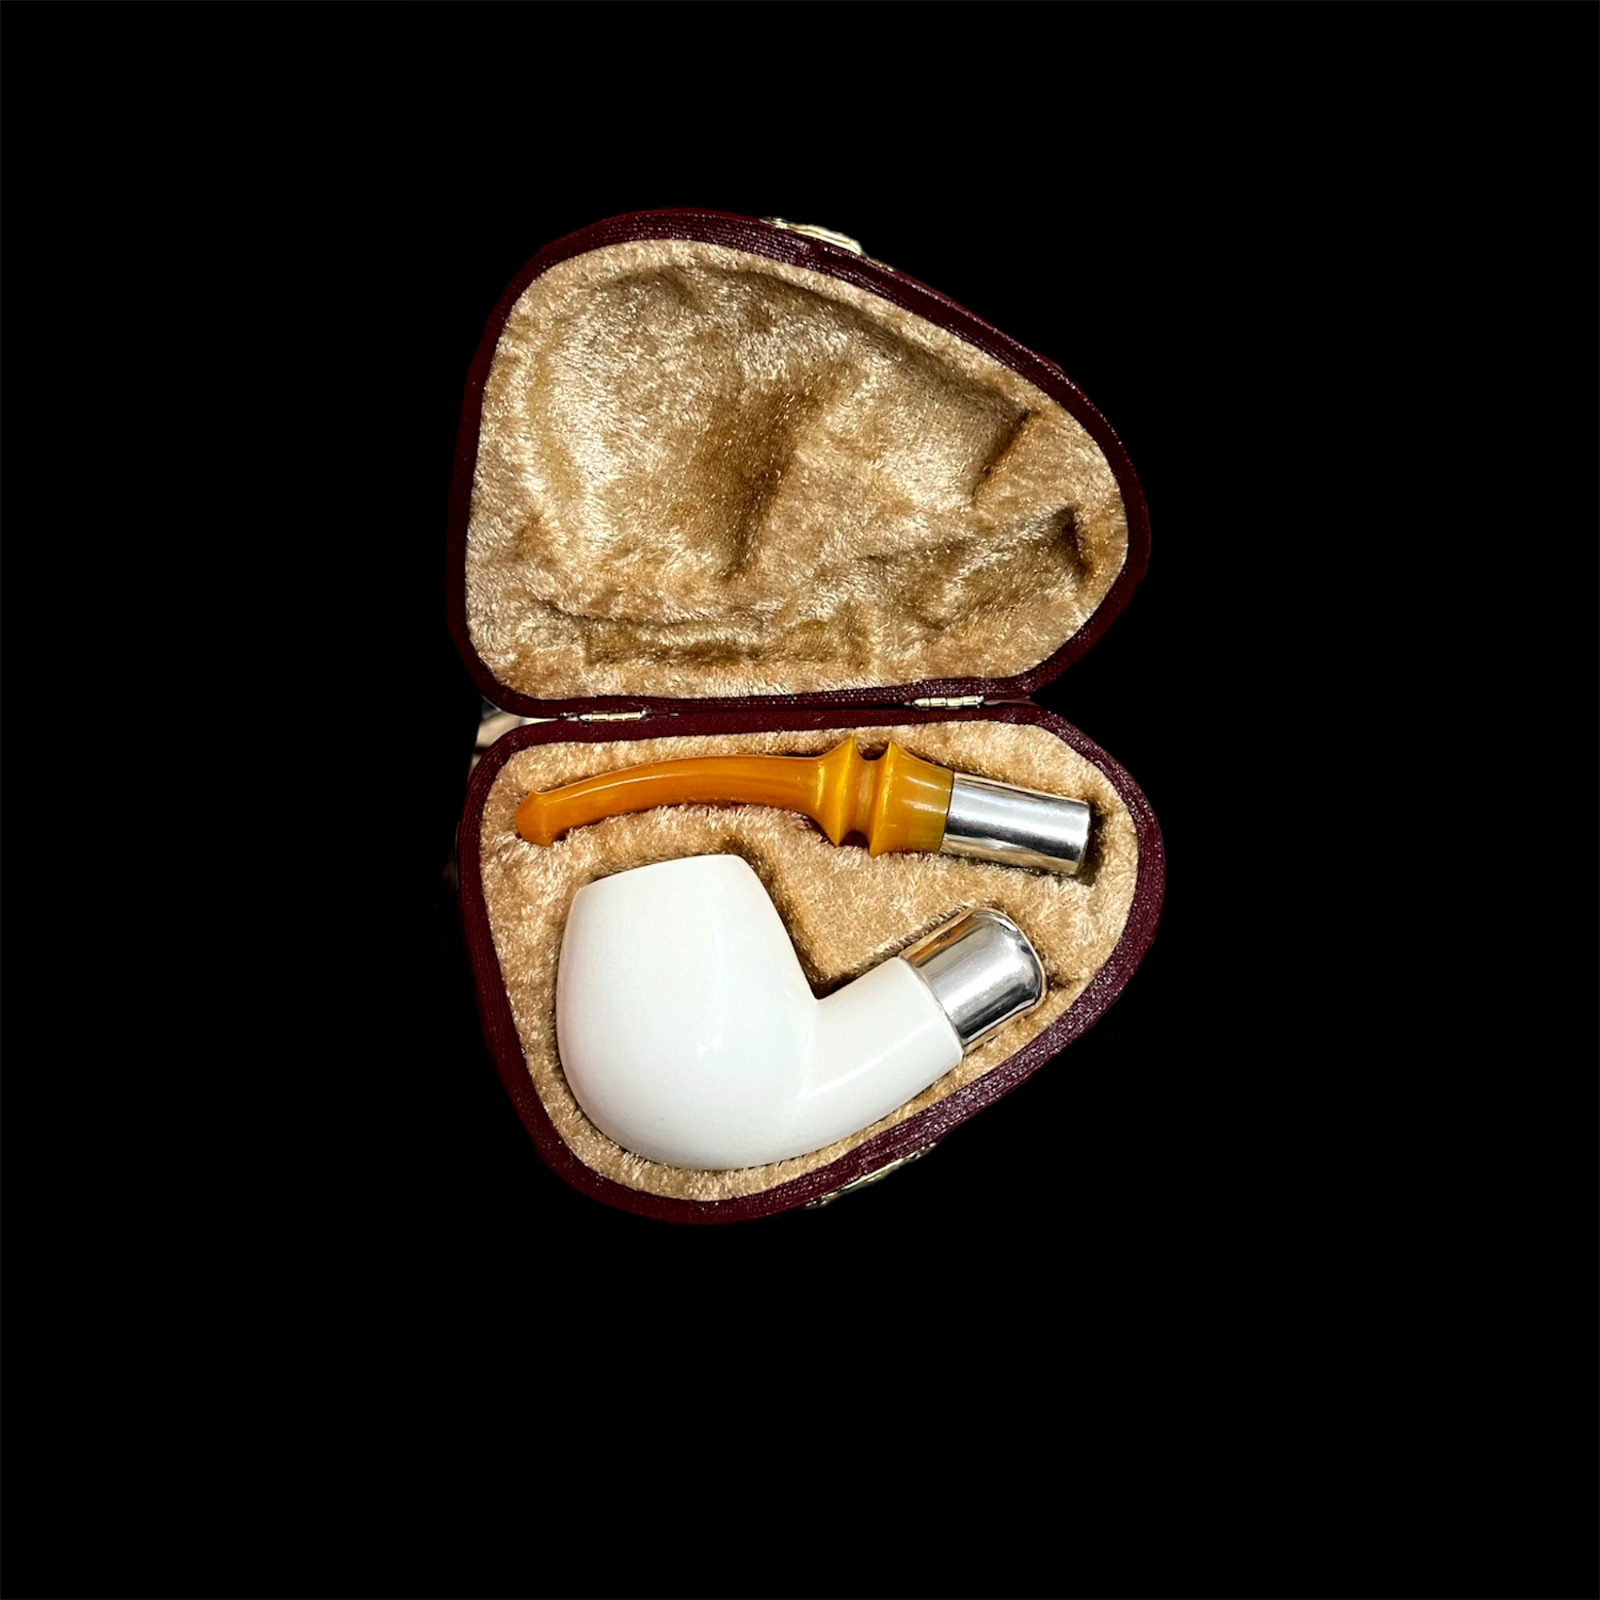 Block Meerschaum Pipe 925 silver unsmoked smoking tobacco pipe w case MD-333